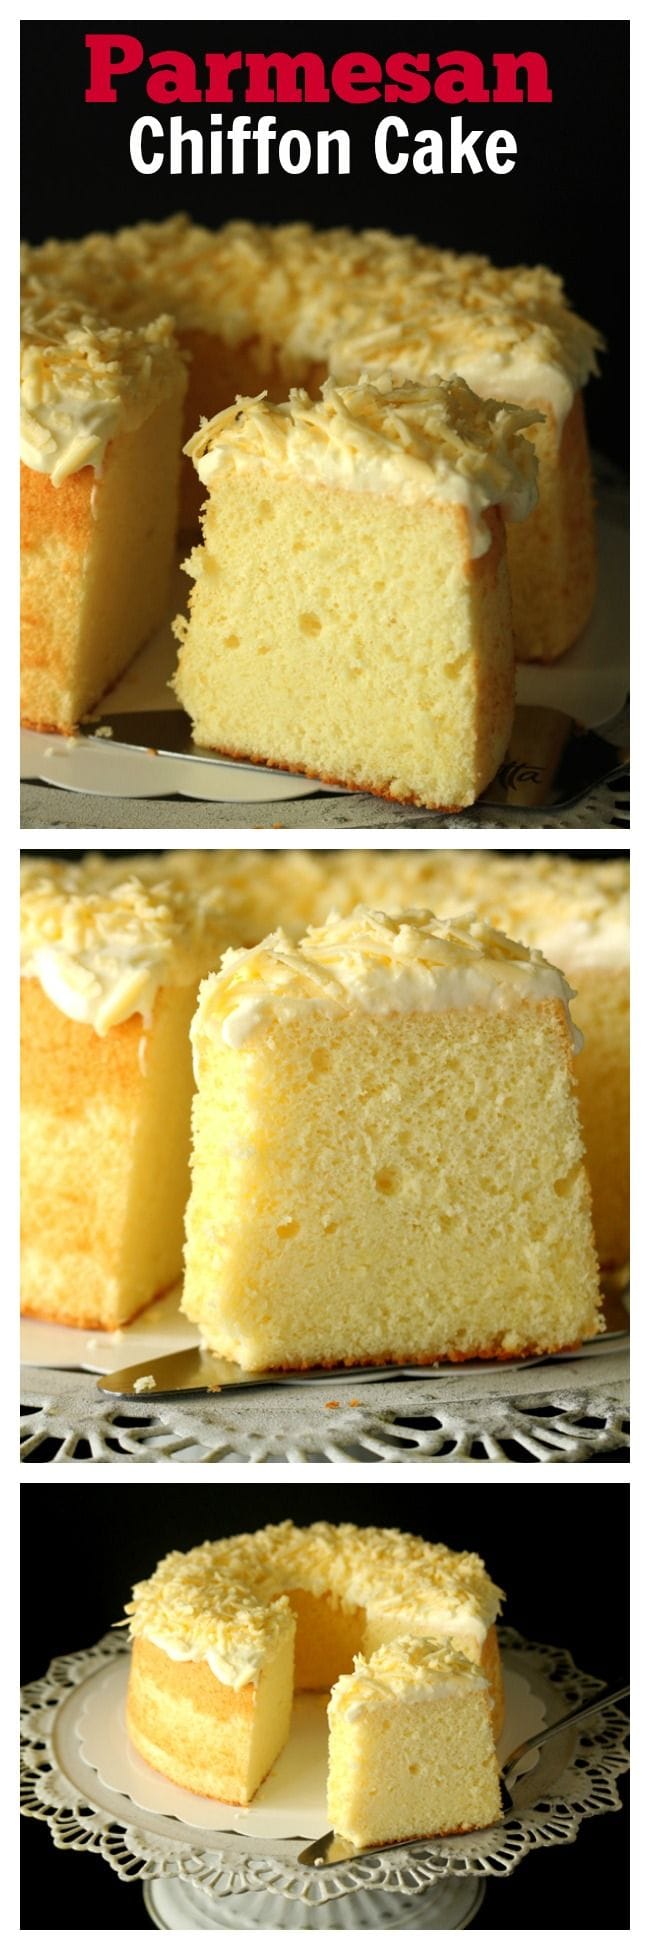 Parmesan chiffon cake – light and airy chiffon cake with a tint of Parmesan cheese, and topped with shredded Parmesan. Amazing recipe that you have to try | rasamalaysia.com